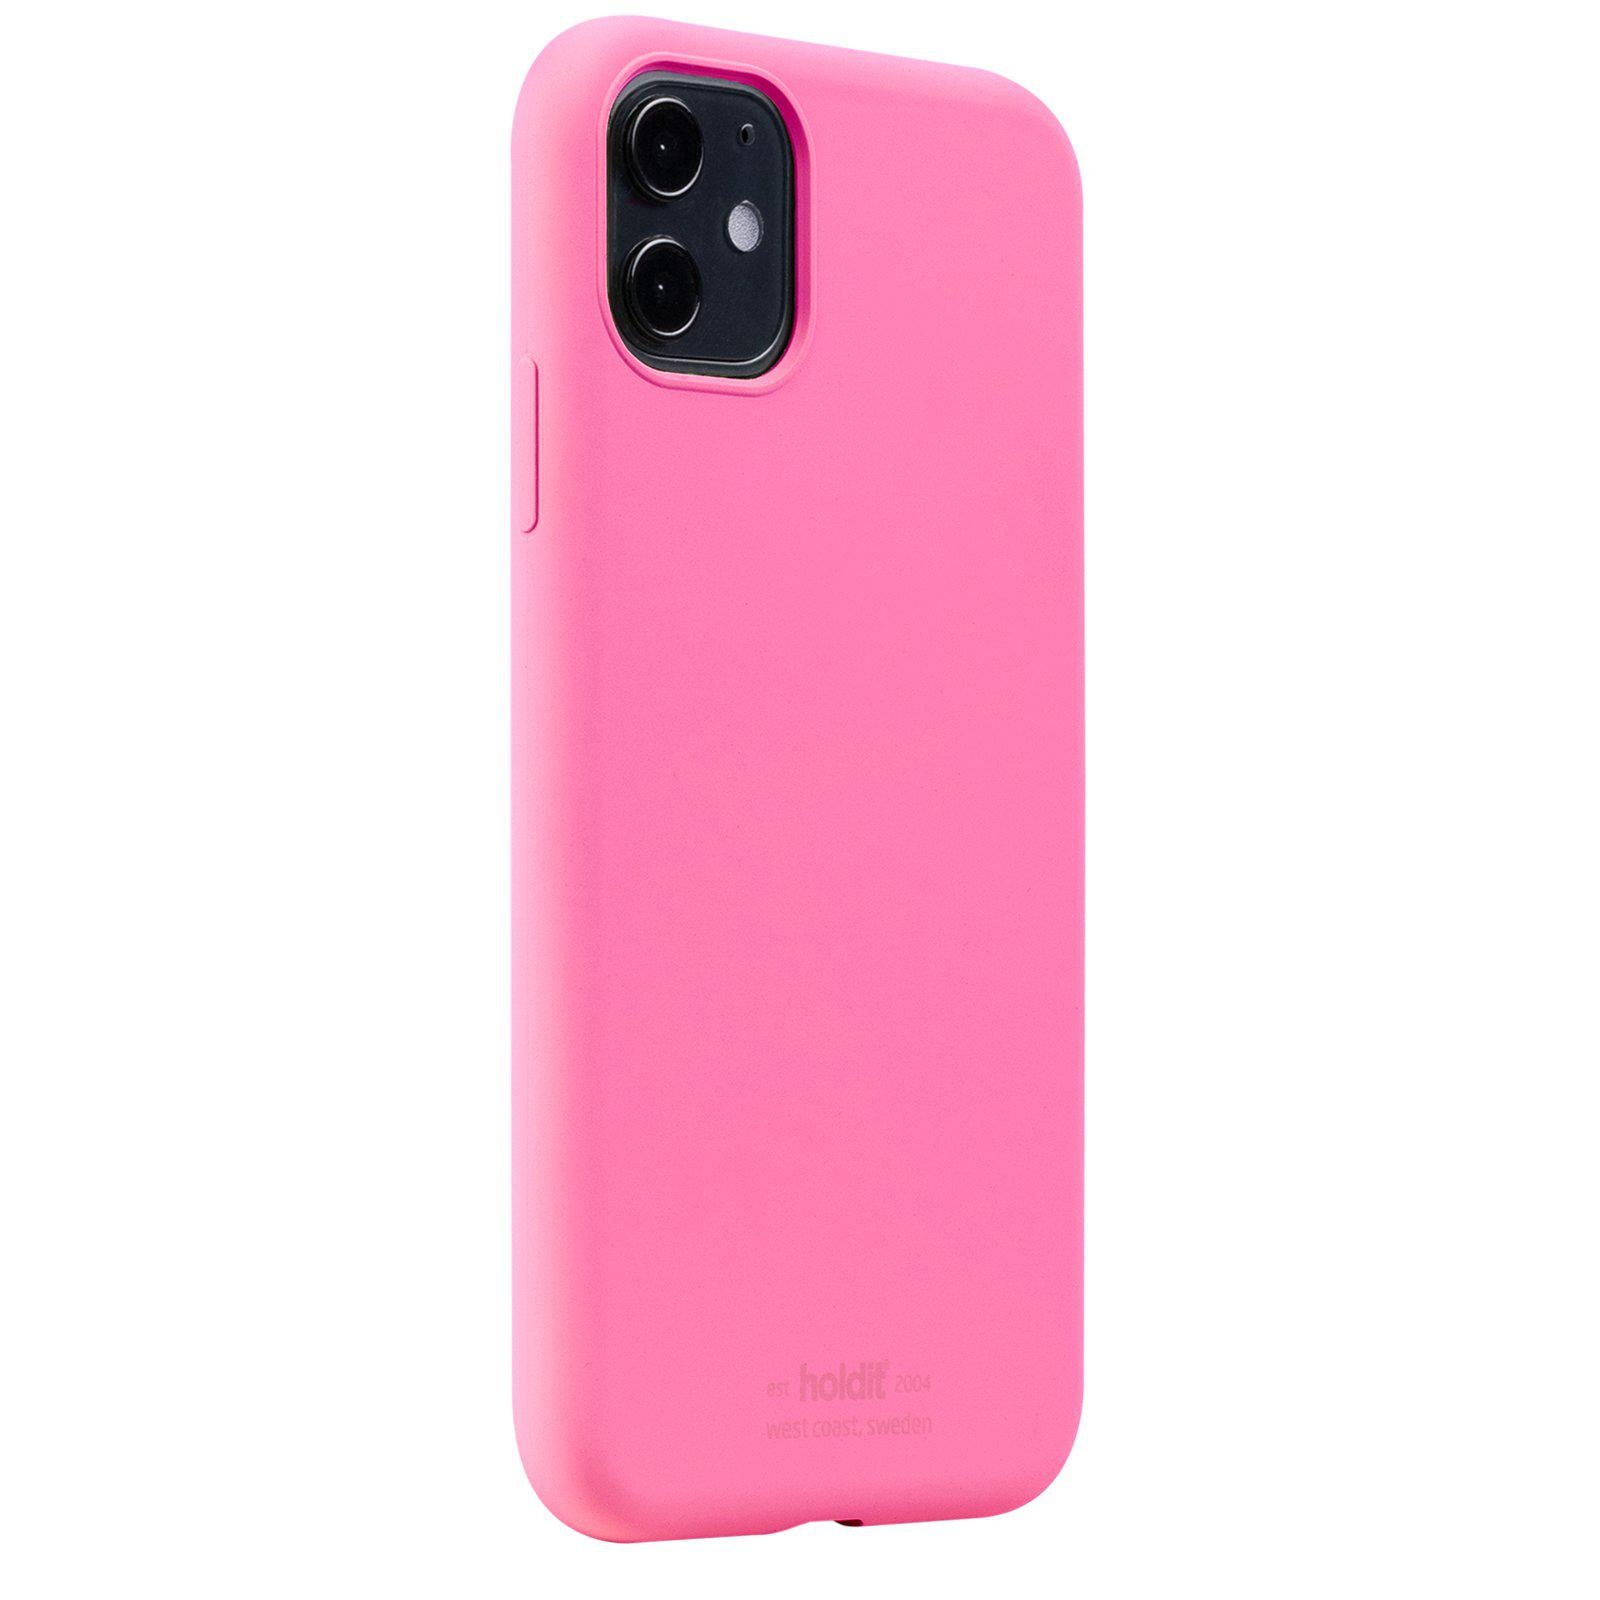 Coque en silicone iPhone XR, Bright Pink